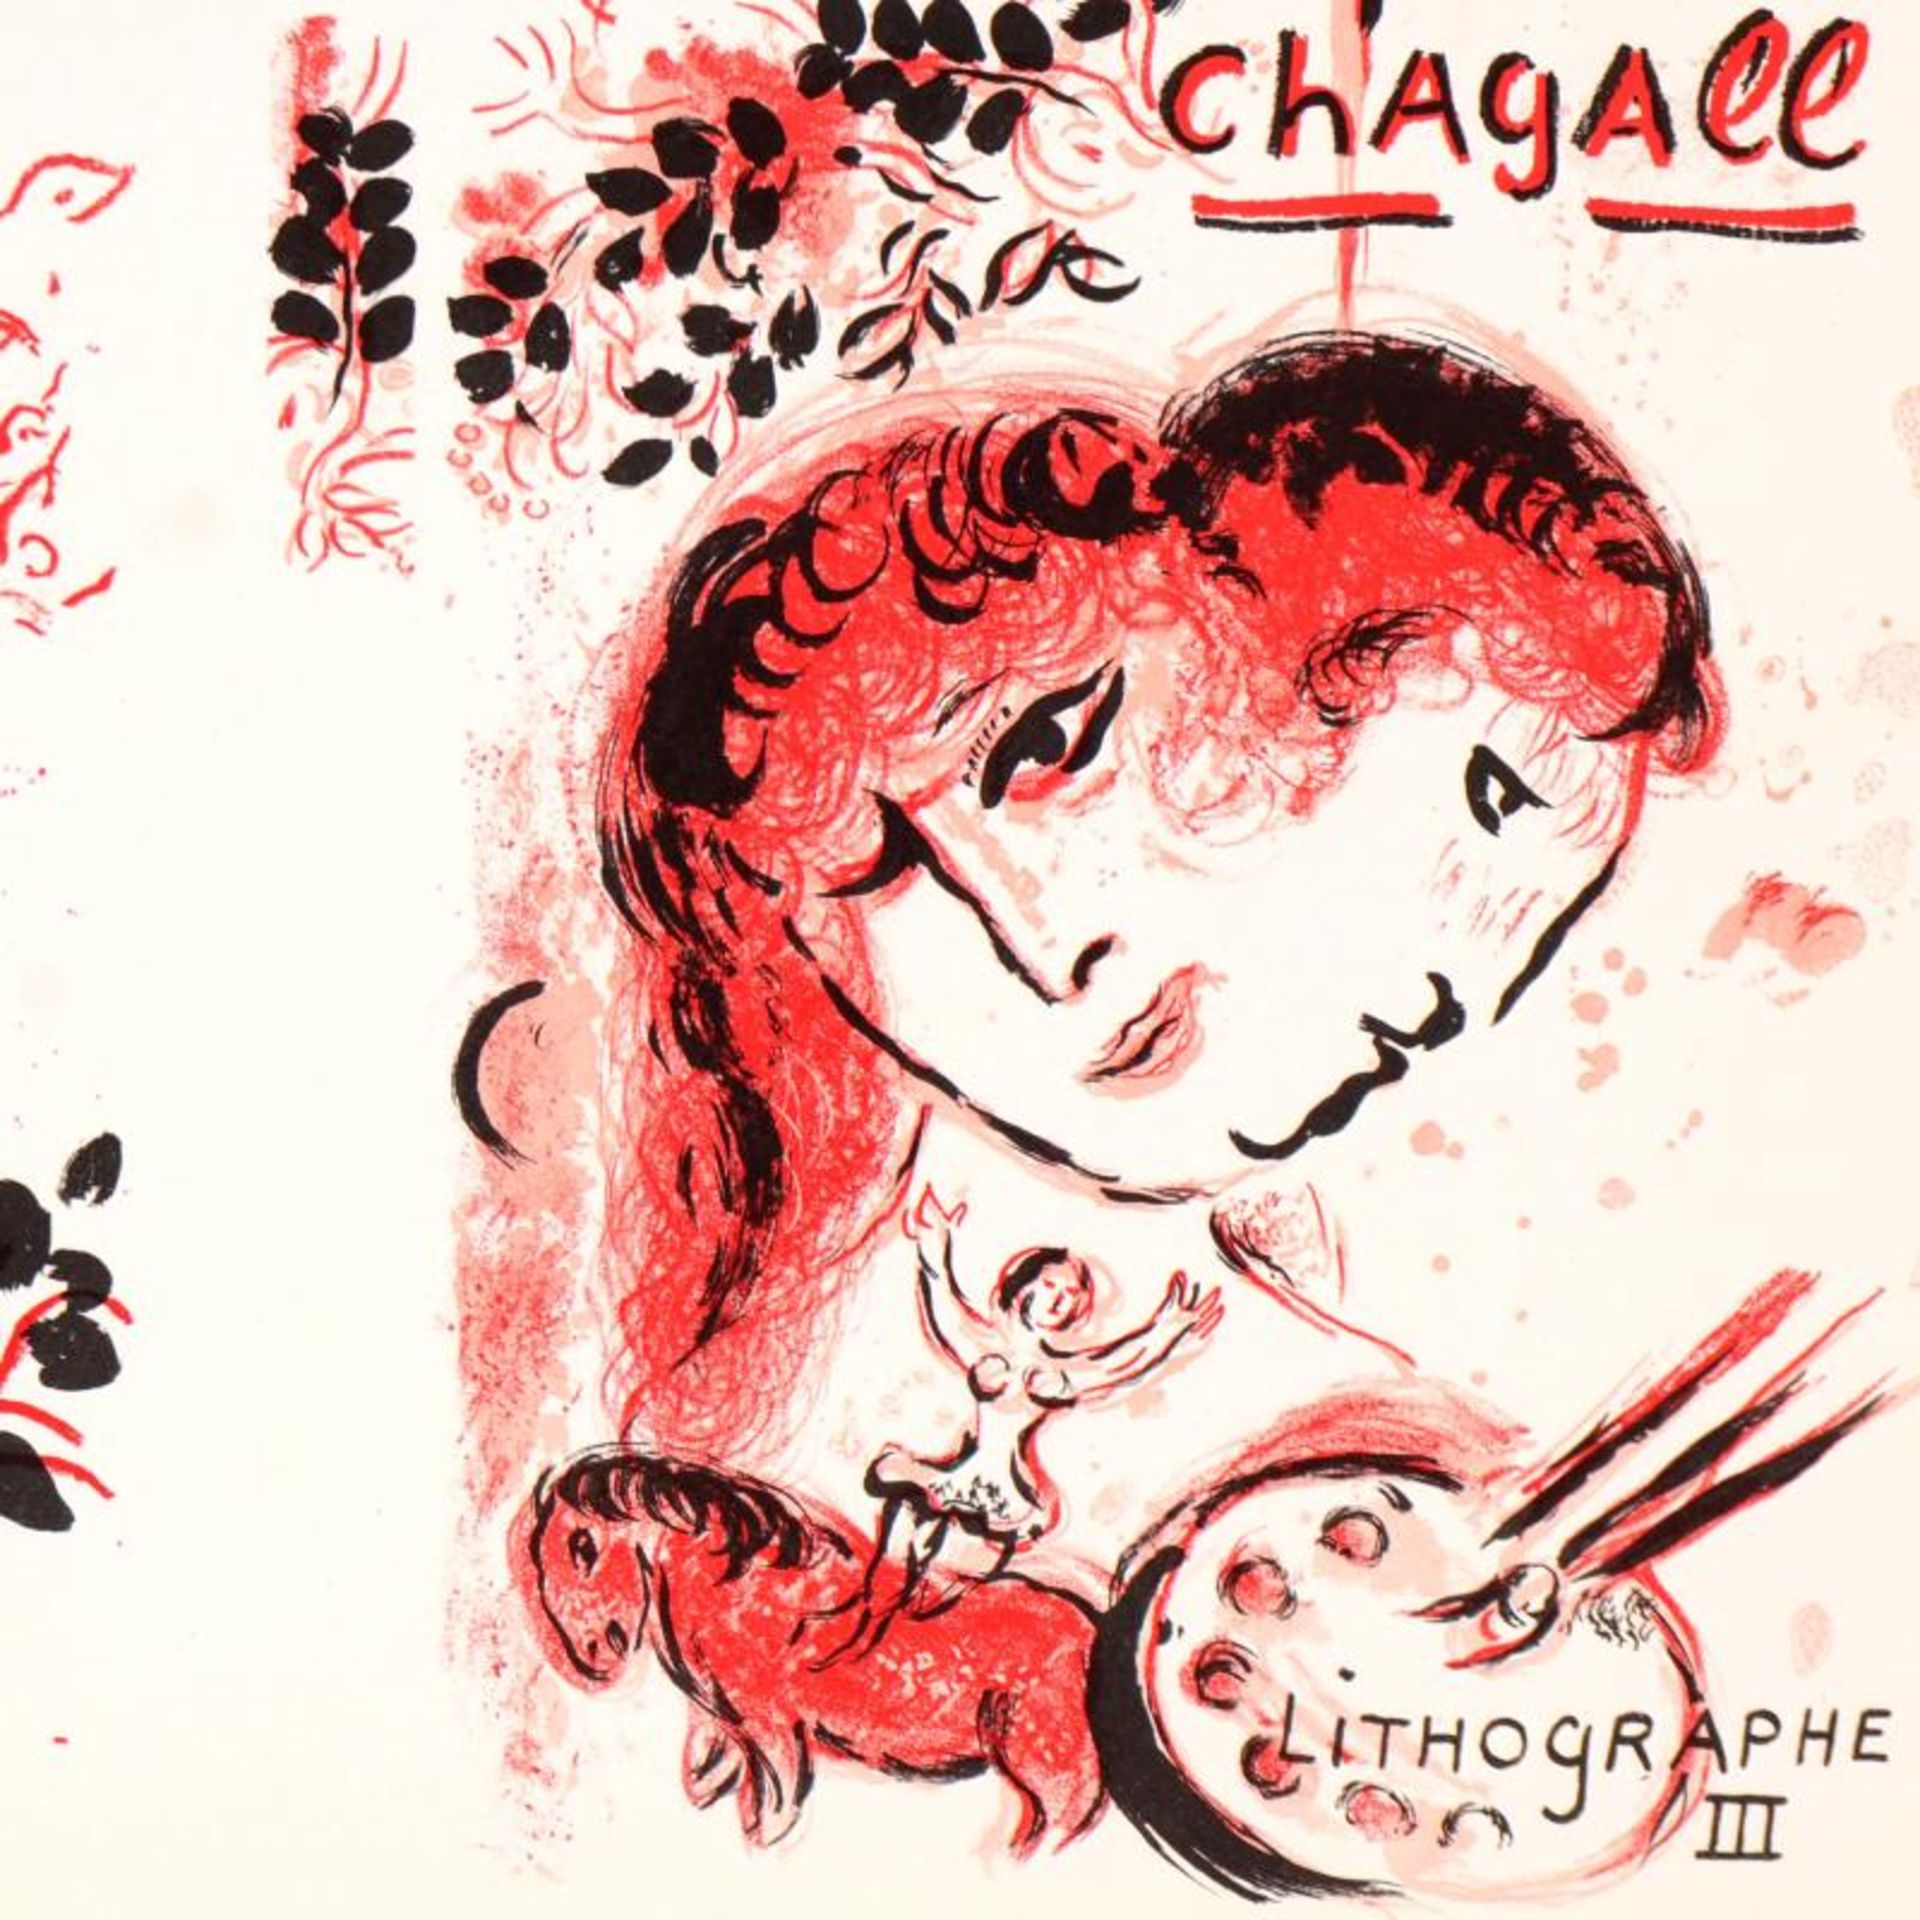 Lithographe III by Chagall (1887-1985) - Image 2 of 2